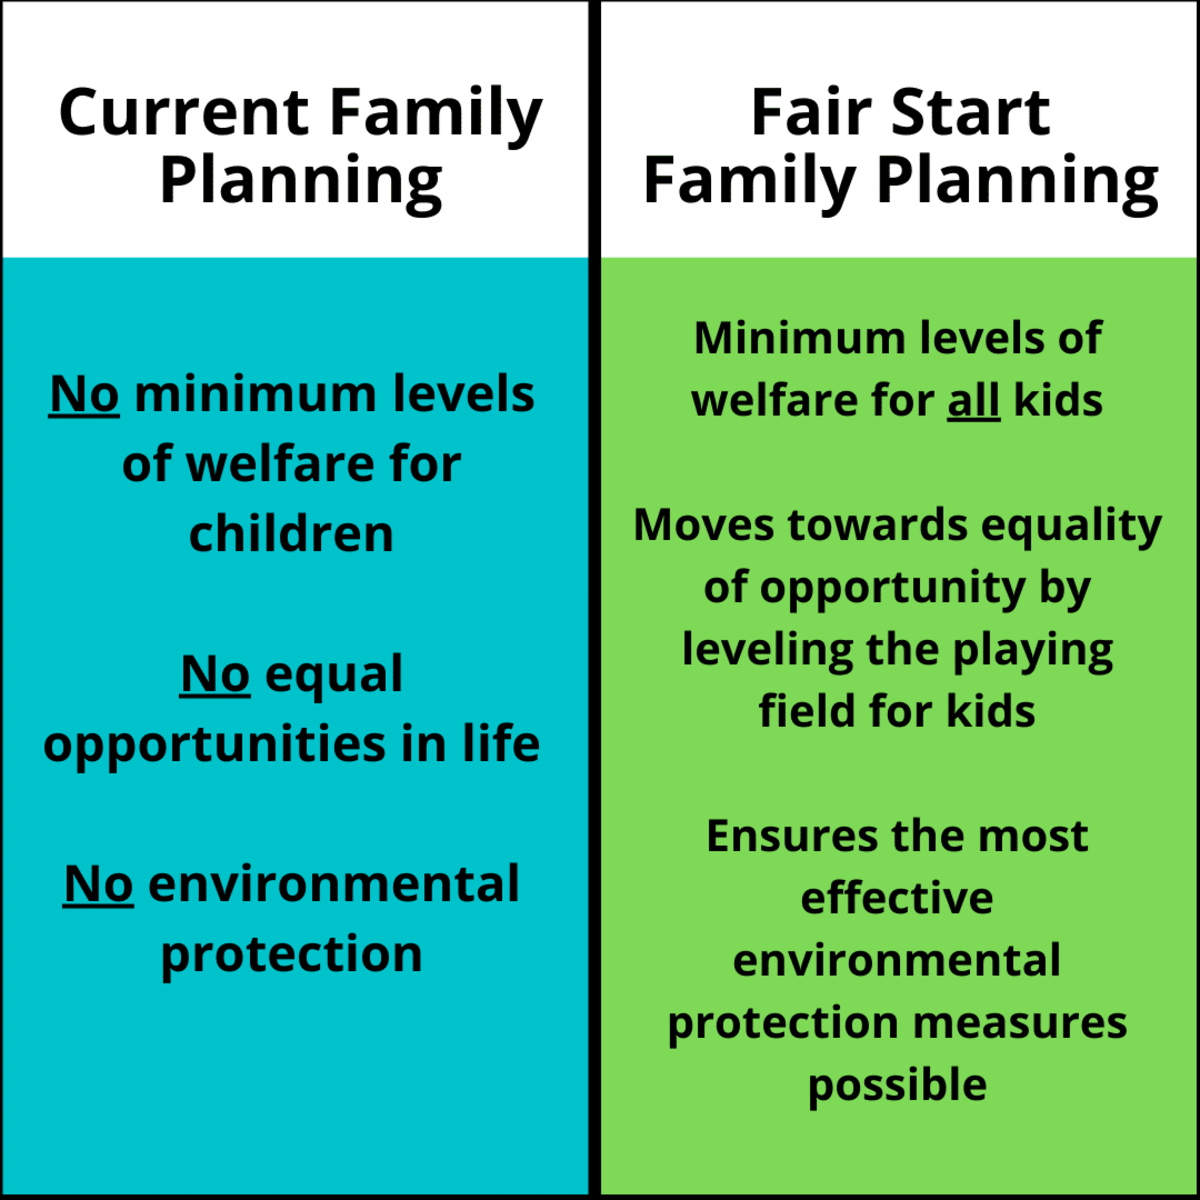 Our basic values are not complex - so why we do evade them in family policy? 